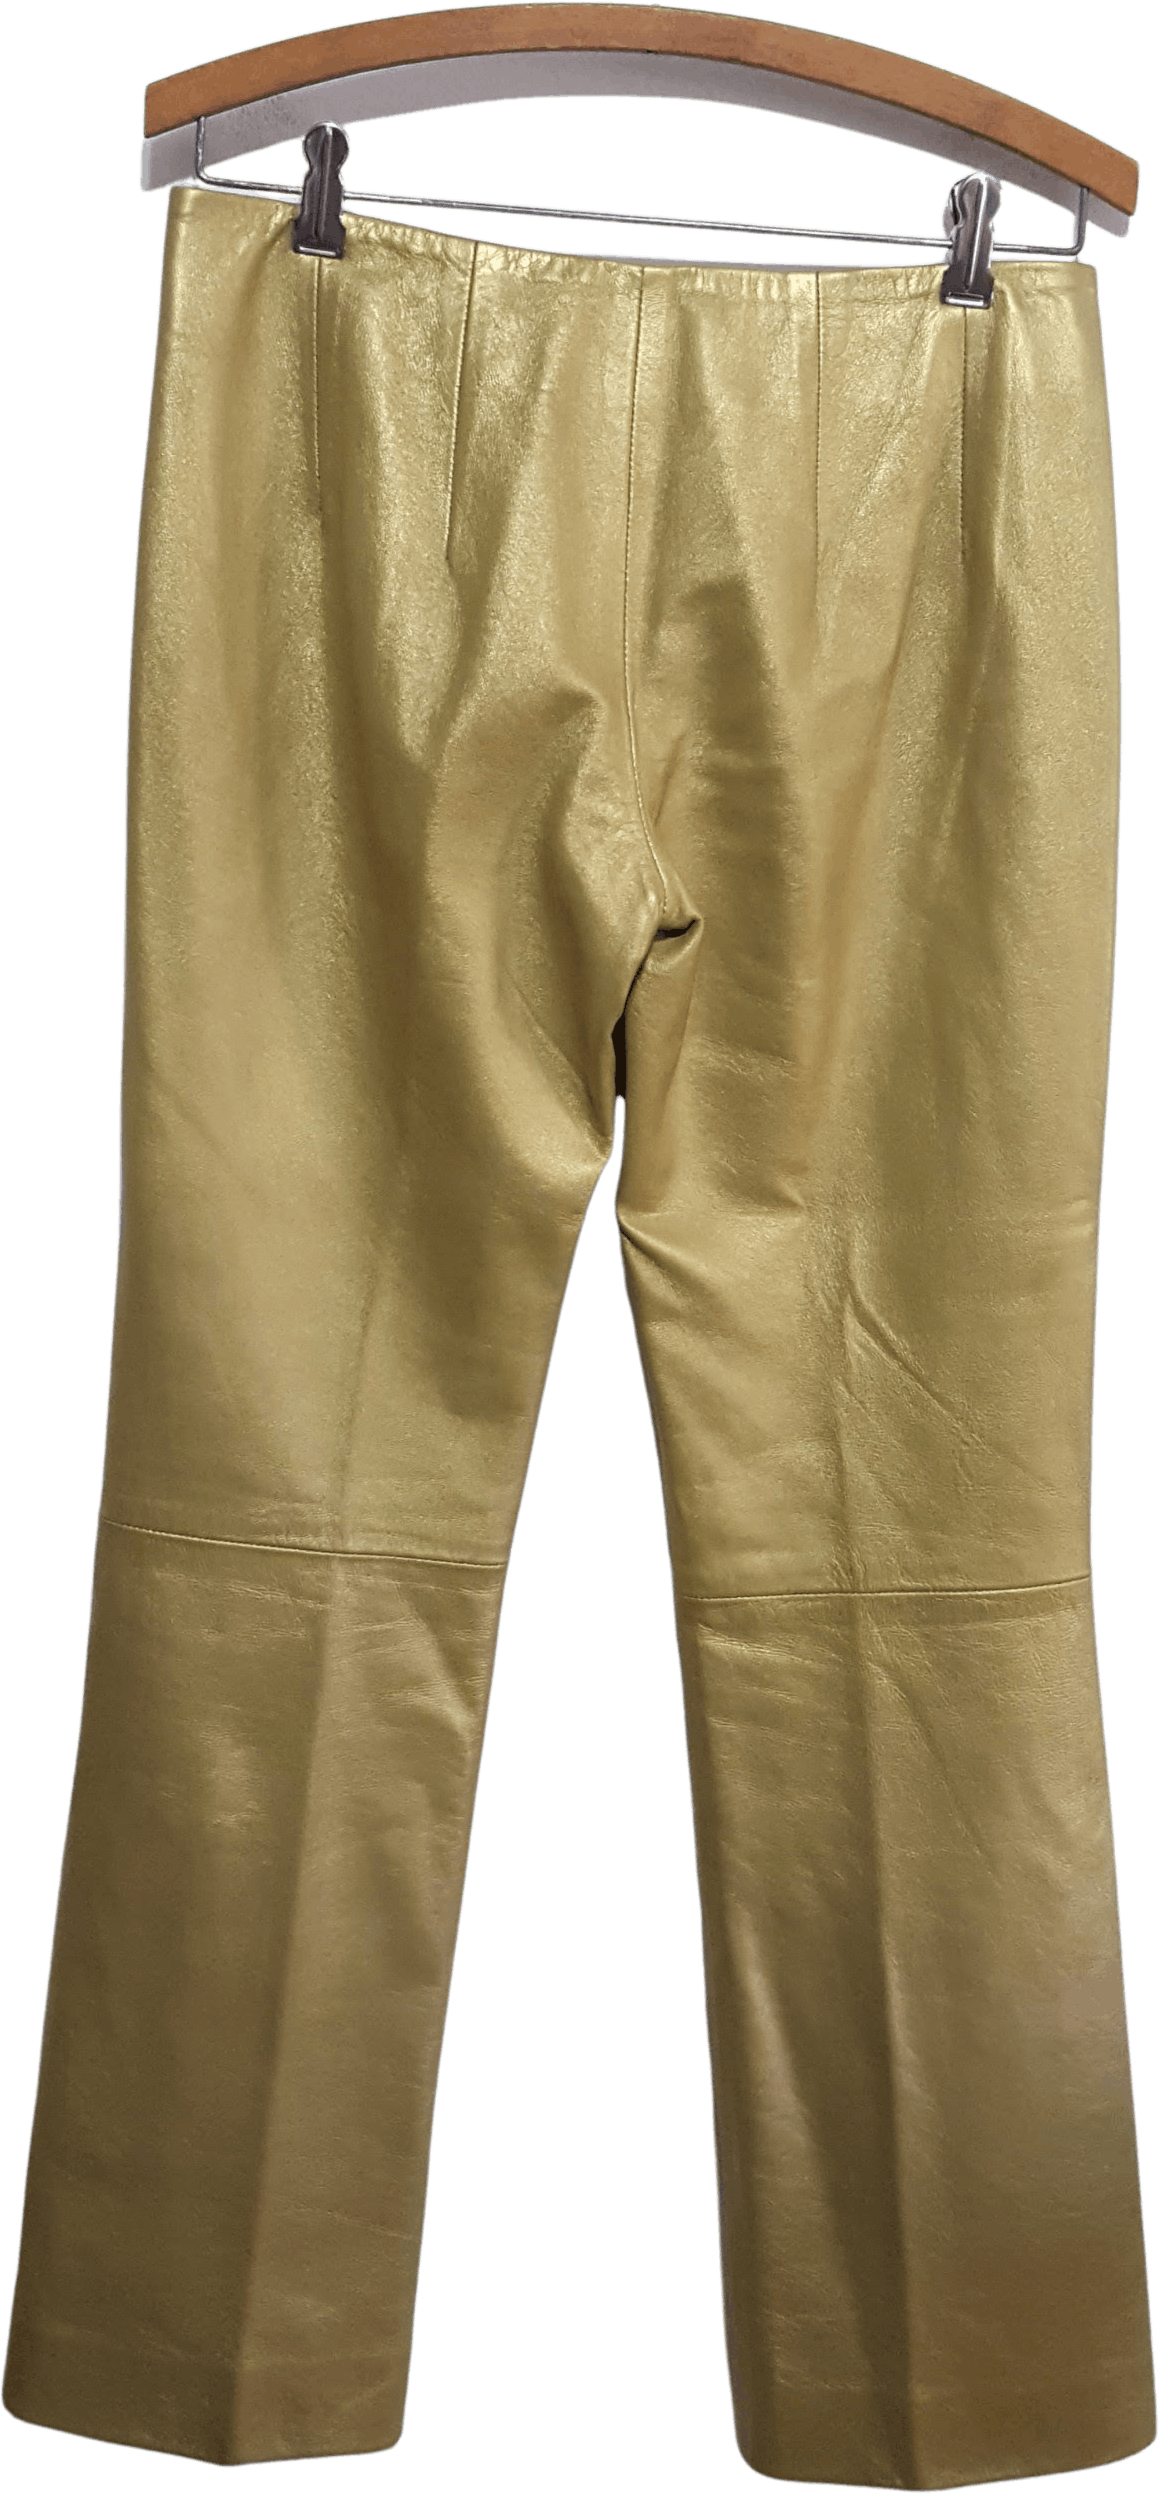 Vintage 00's Metallic Gold Leather Pants by Burberry - Free Shipping ...